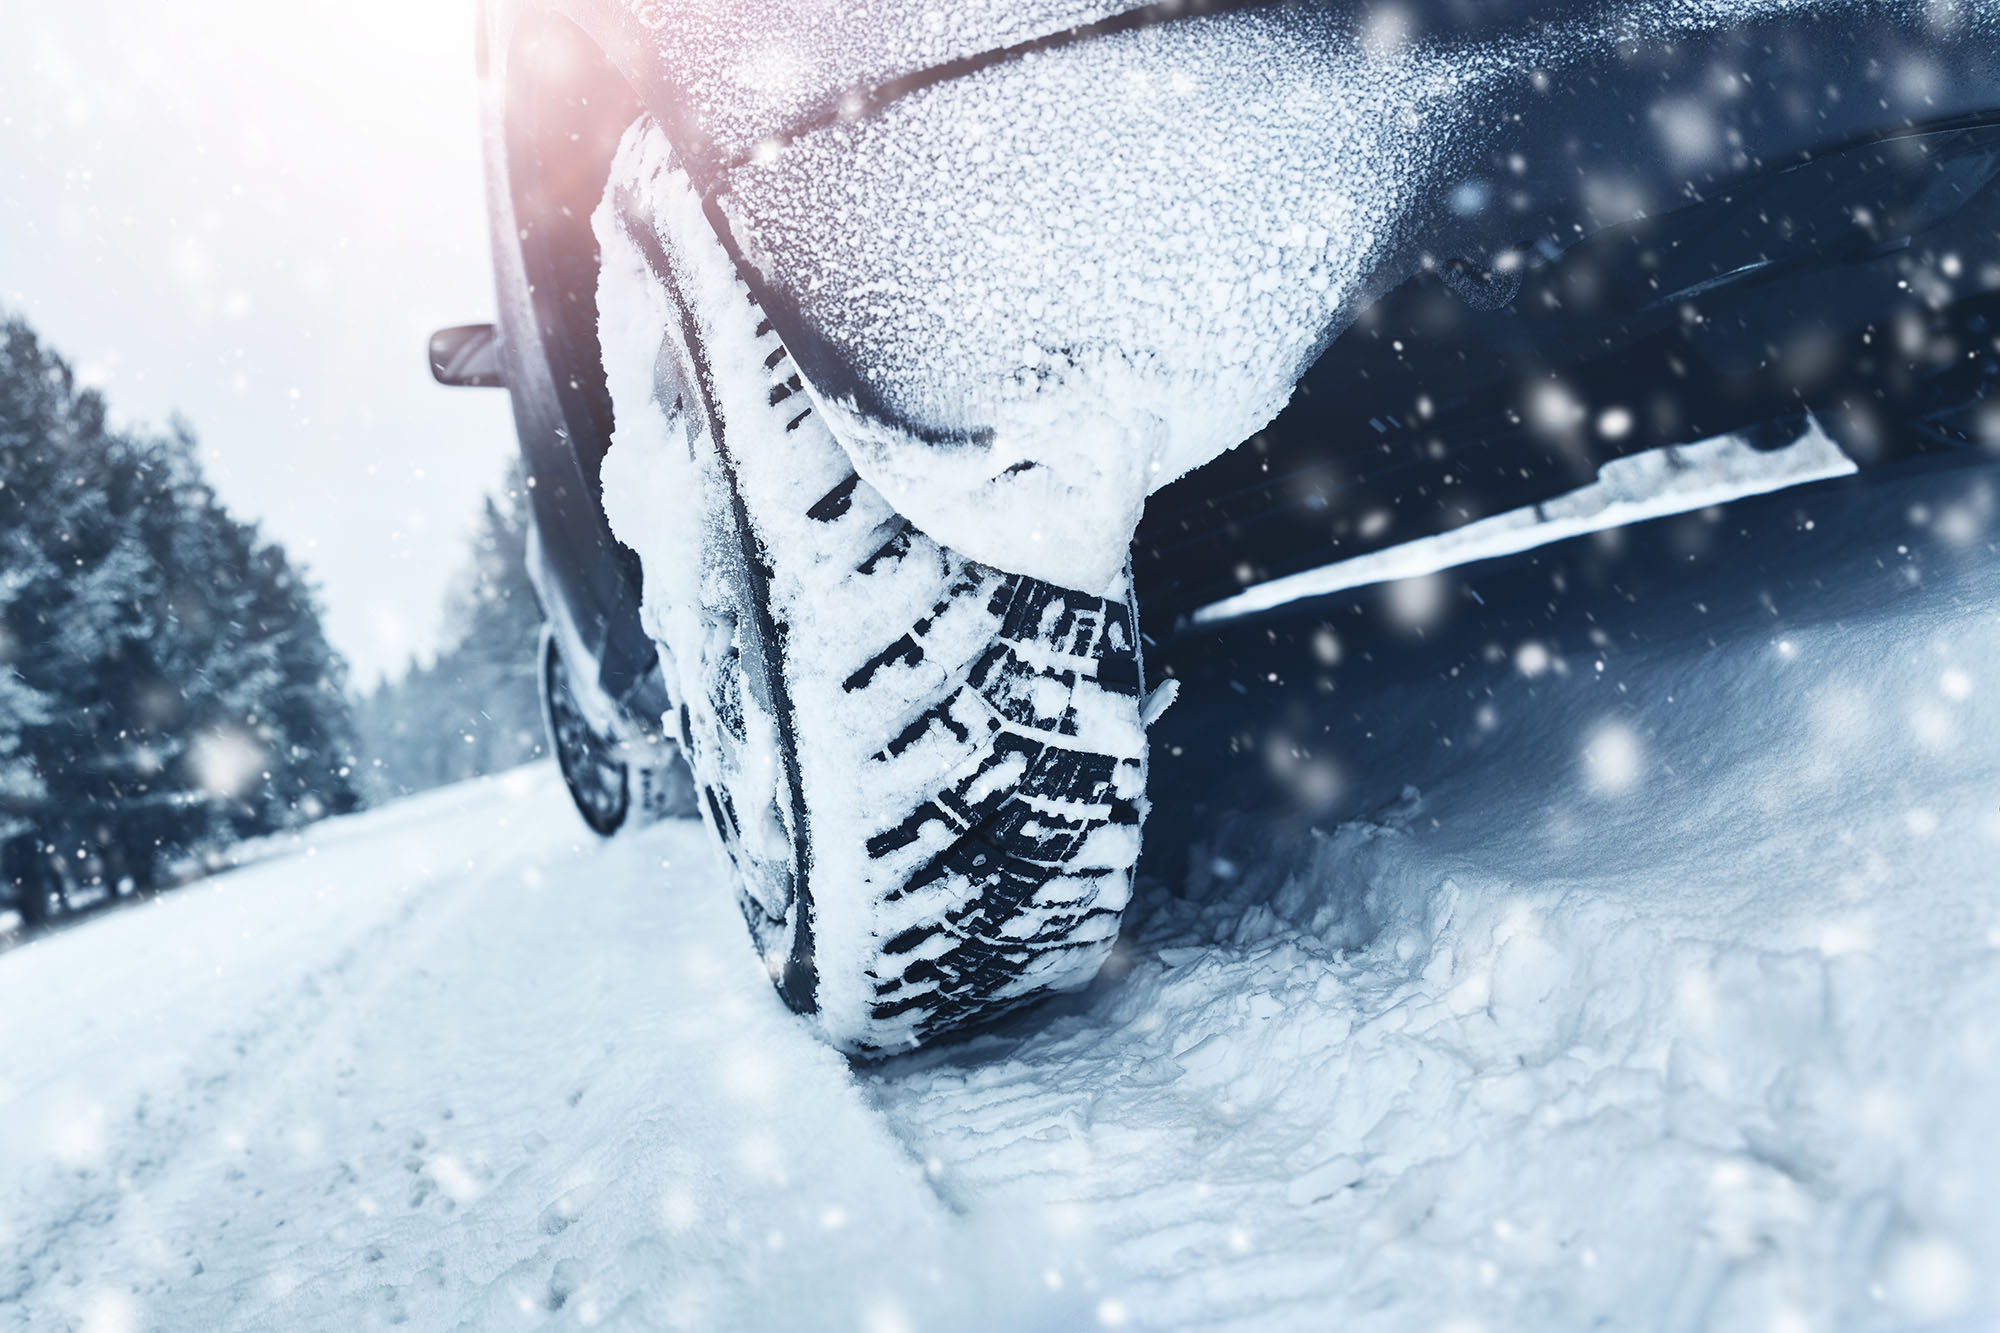 Close-up of a car's rear tire on a snowy road